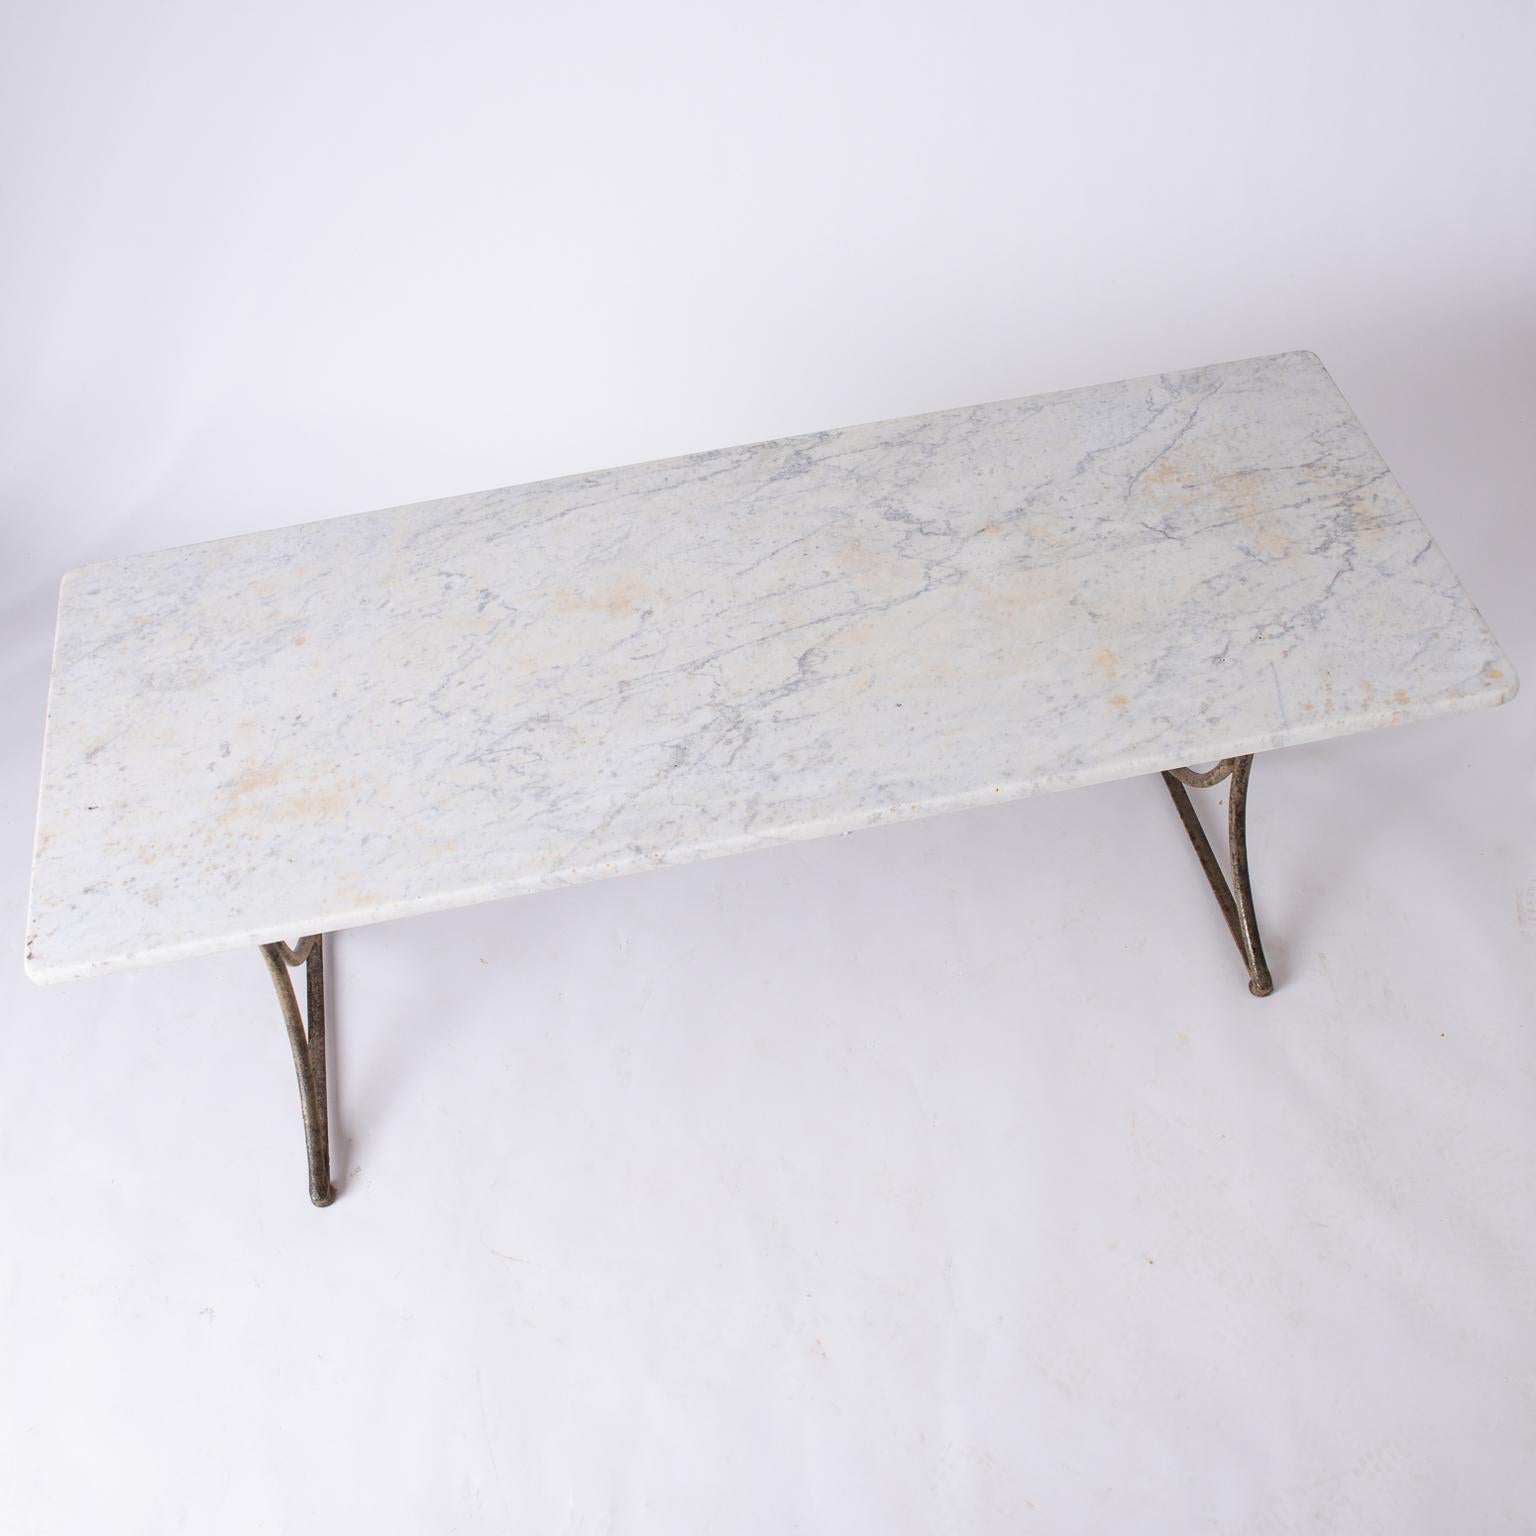 This table has a wonderful antique white marble top that is almost one inch thick. The base, made of handwrought iron, has a very sleek and unusual design with a surface that shows traces of old bronze paint. The marble top shows some discolorations